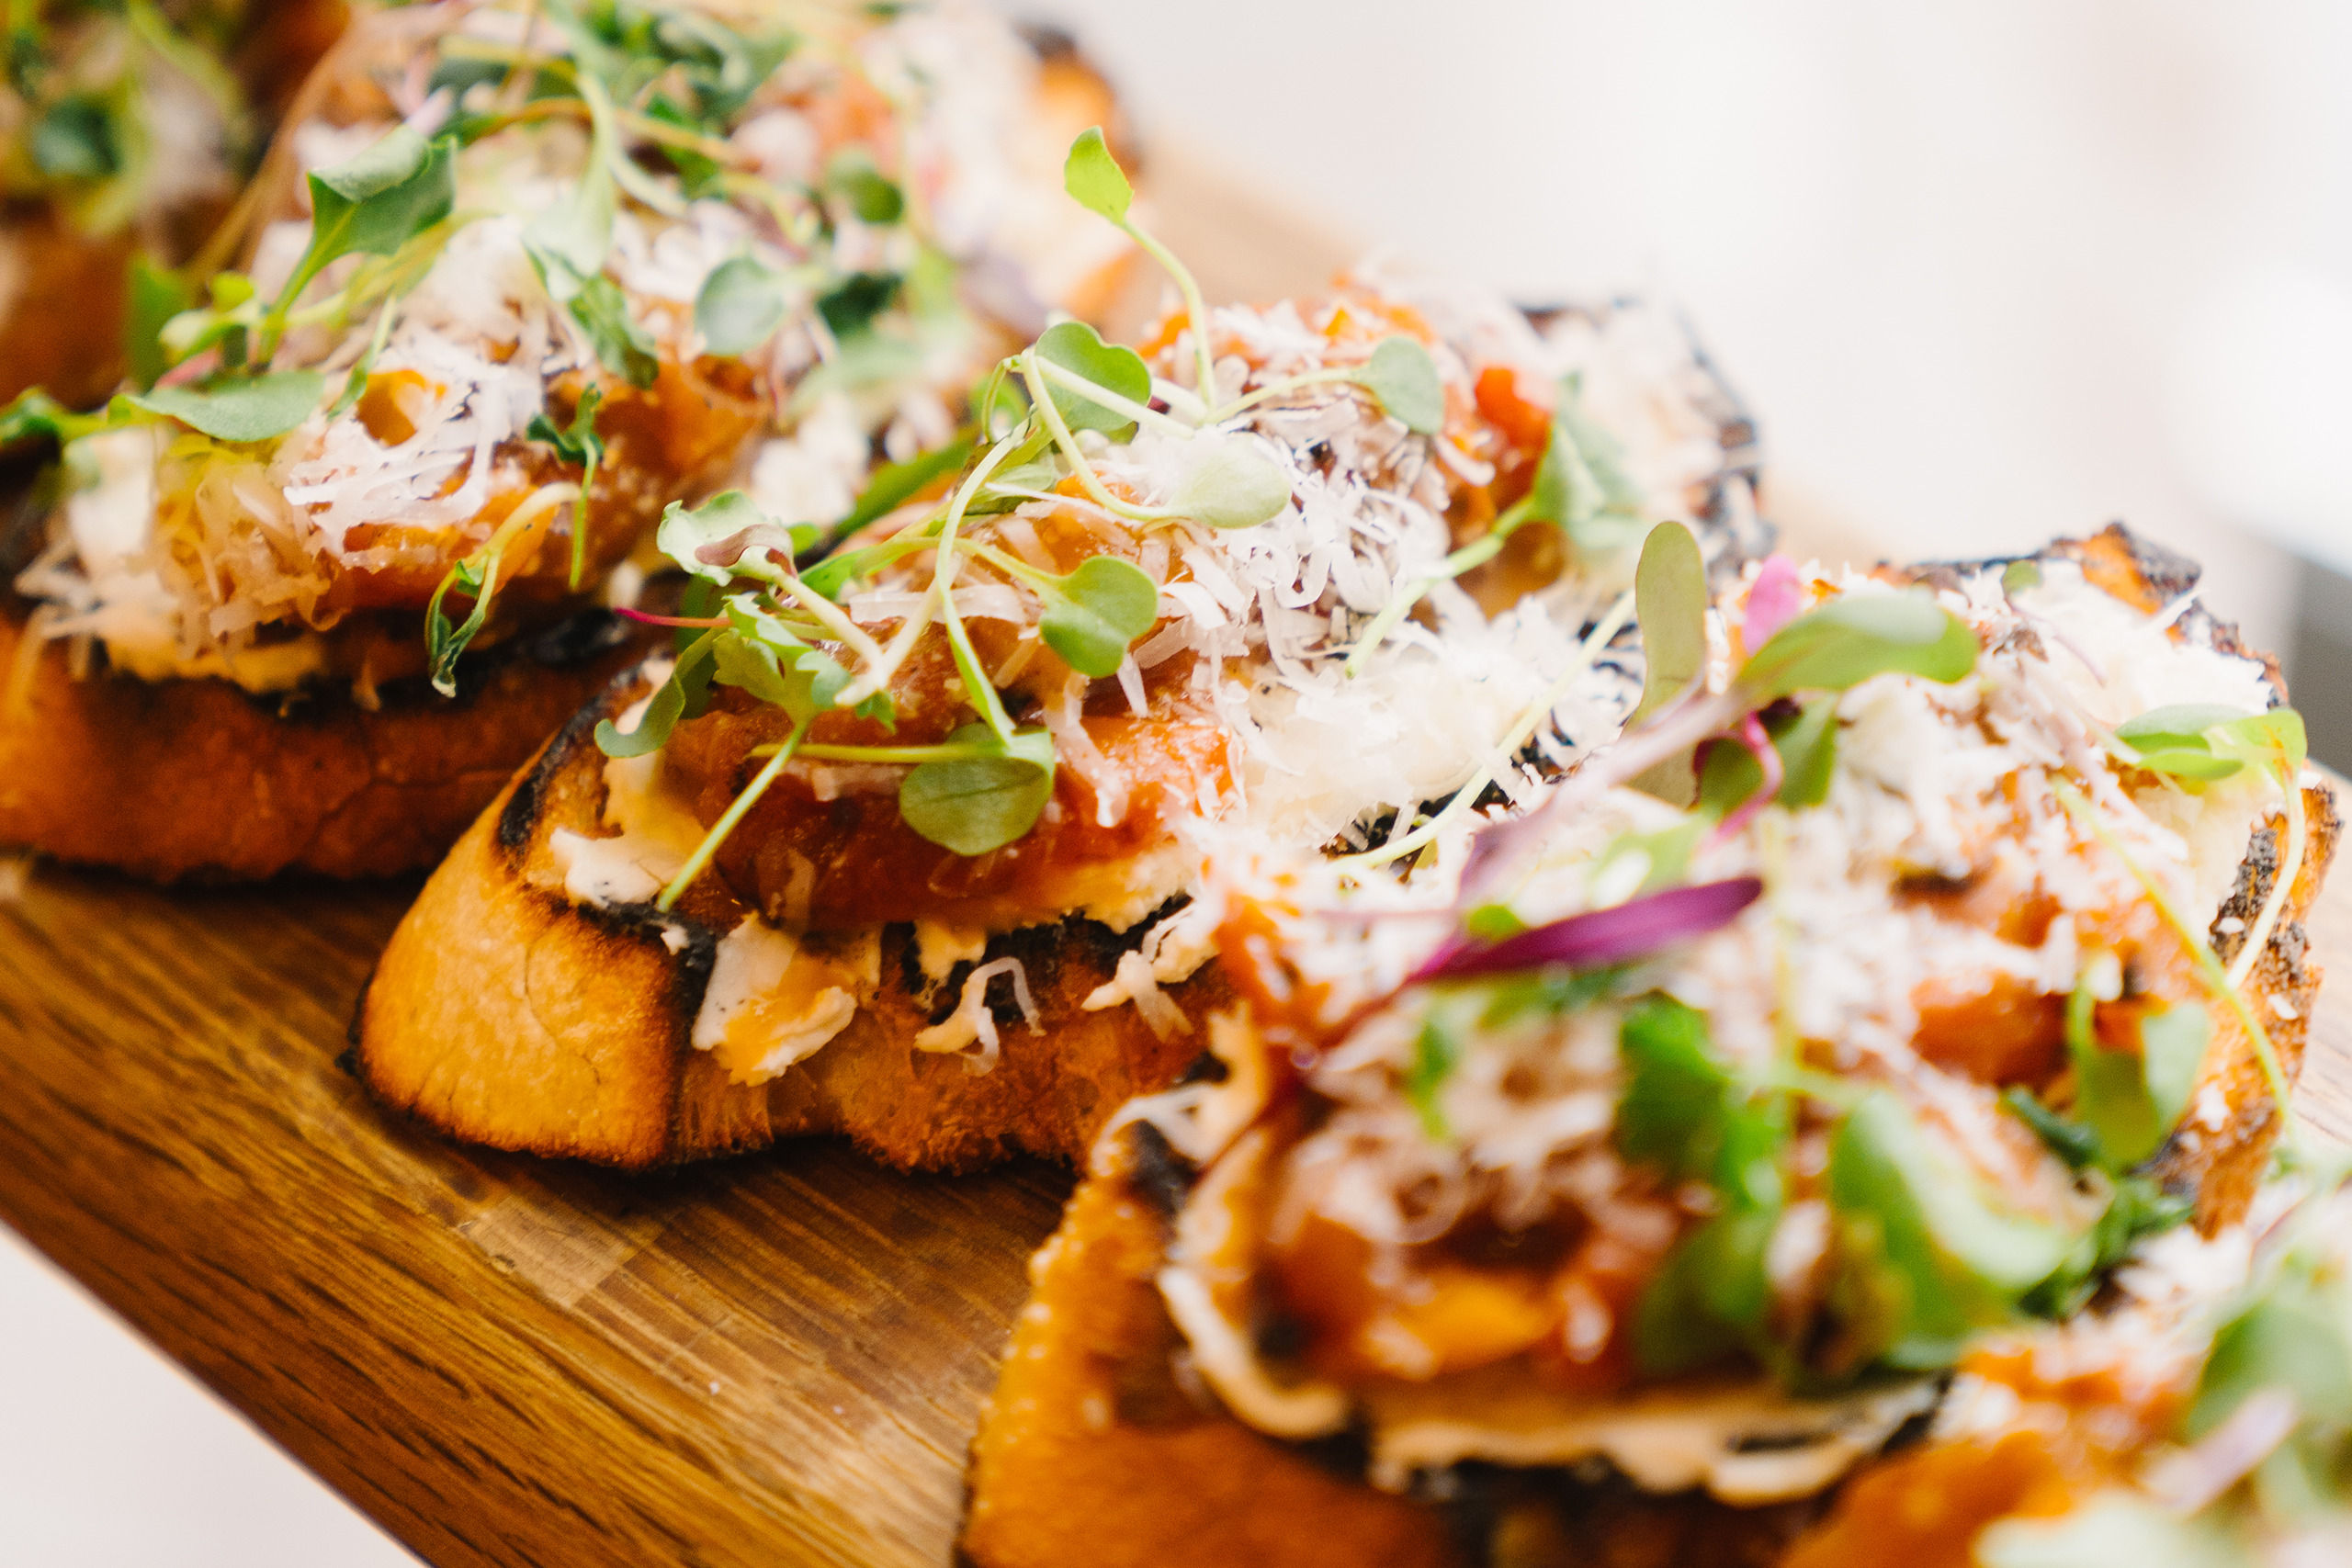 Fresh Italian Bruschetta serves as a catering options for a wedding at The Grand America Hotel.